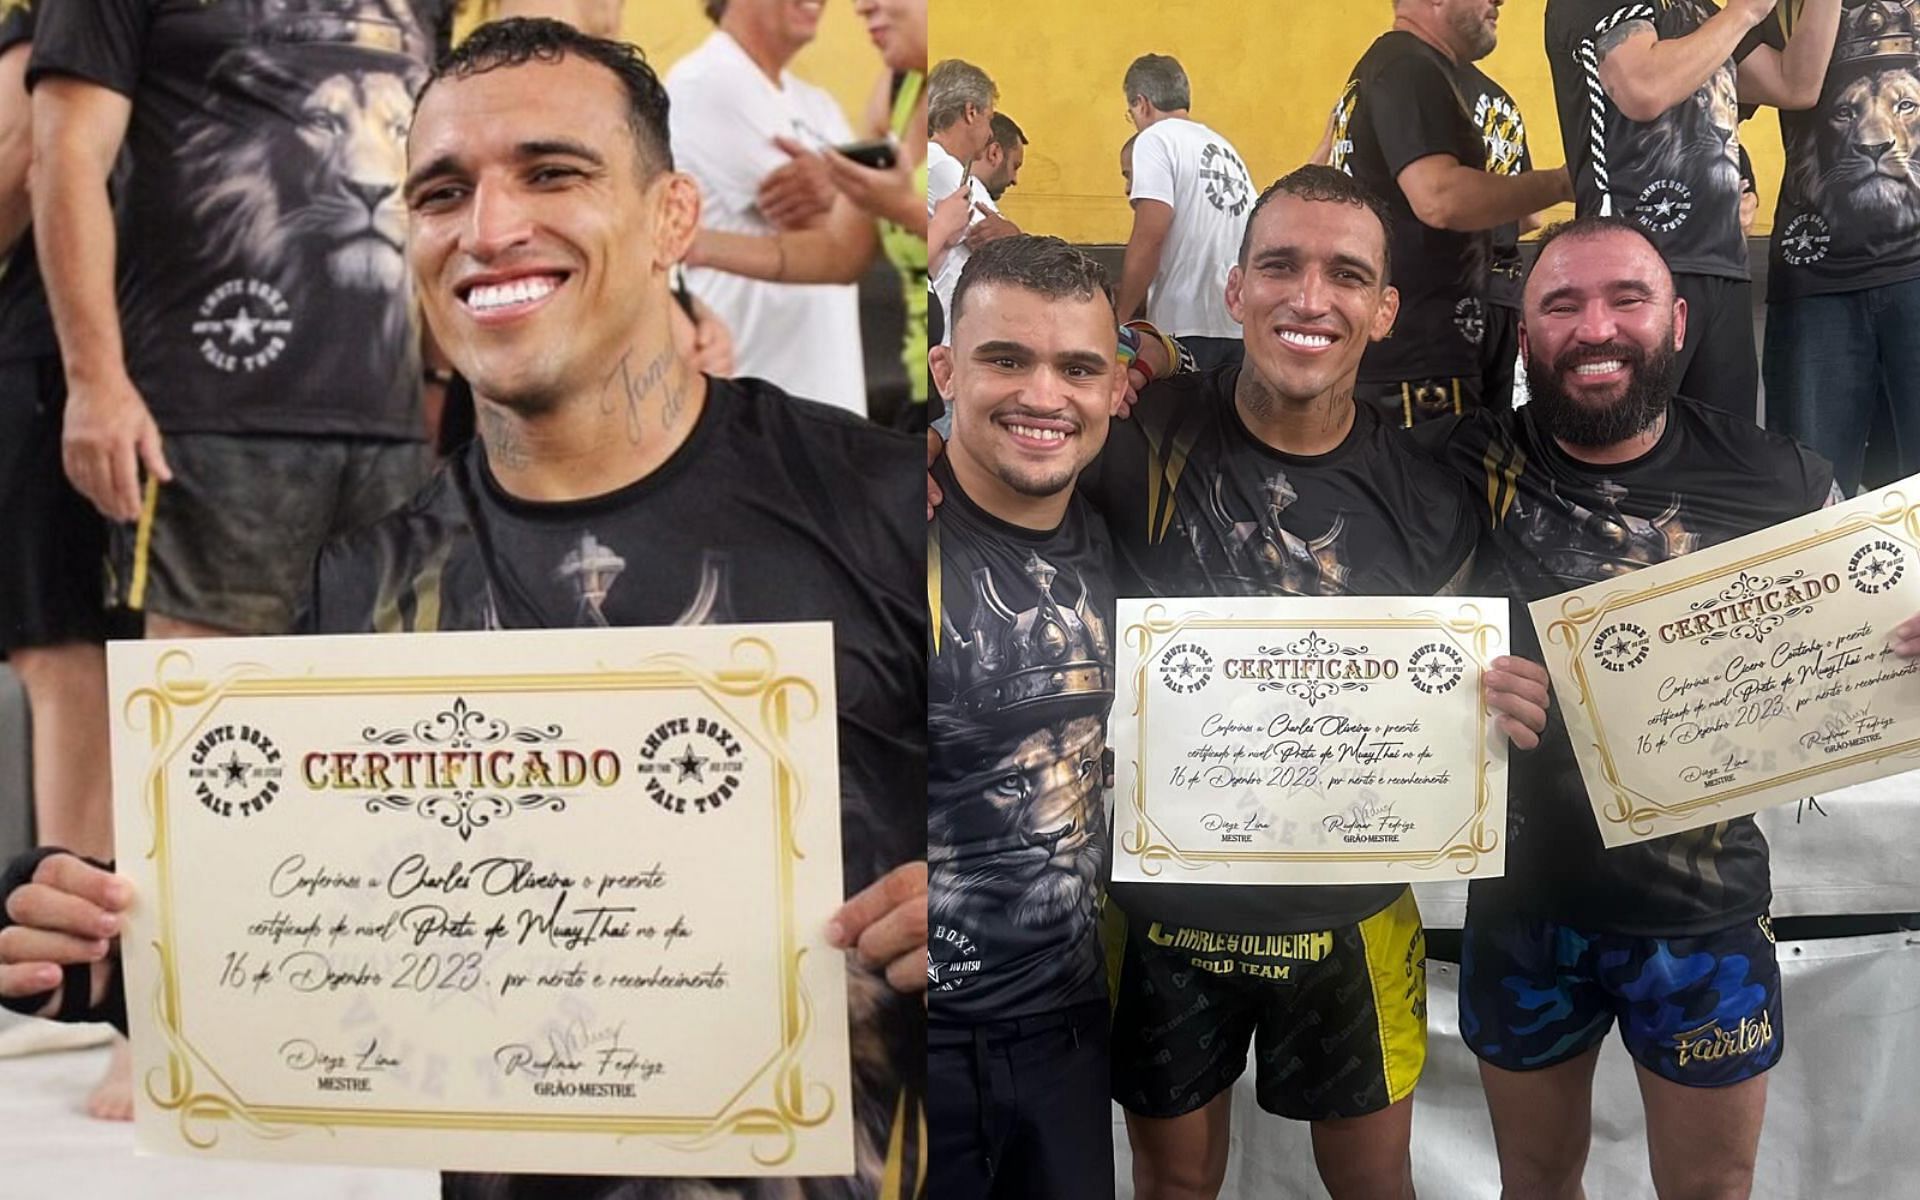 Charles Oliveira receiving his Muay Thai certification from Chute Boxe